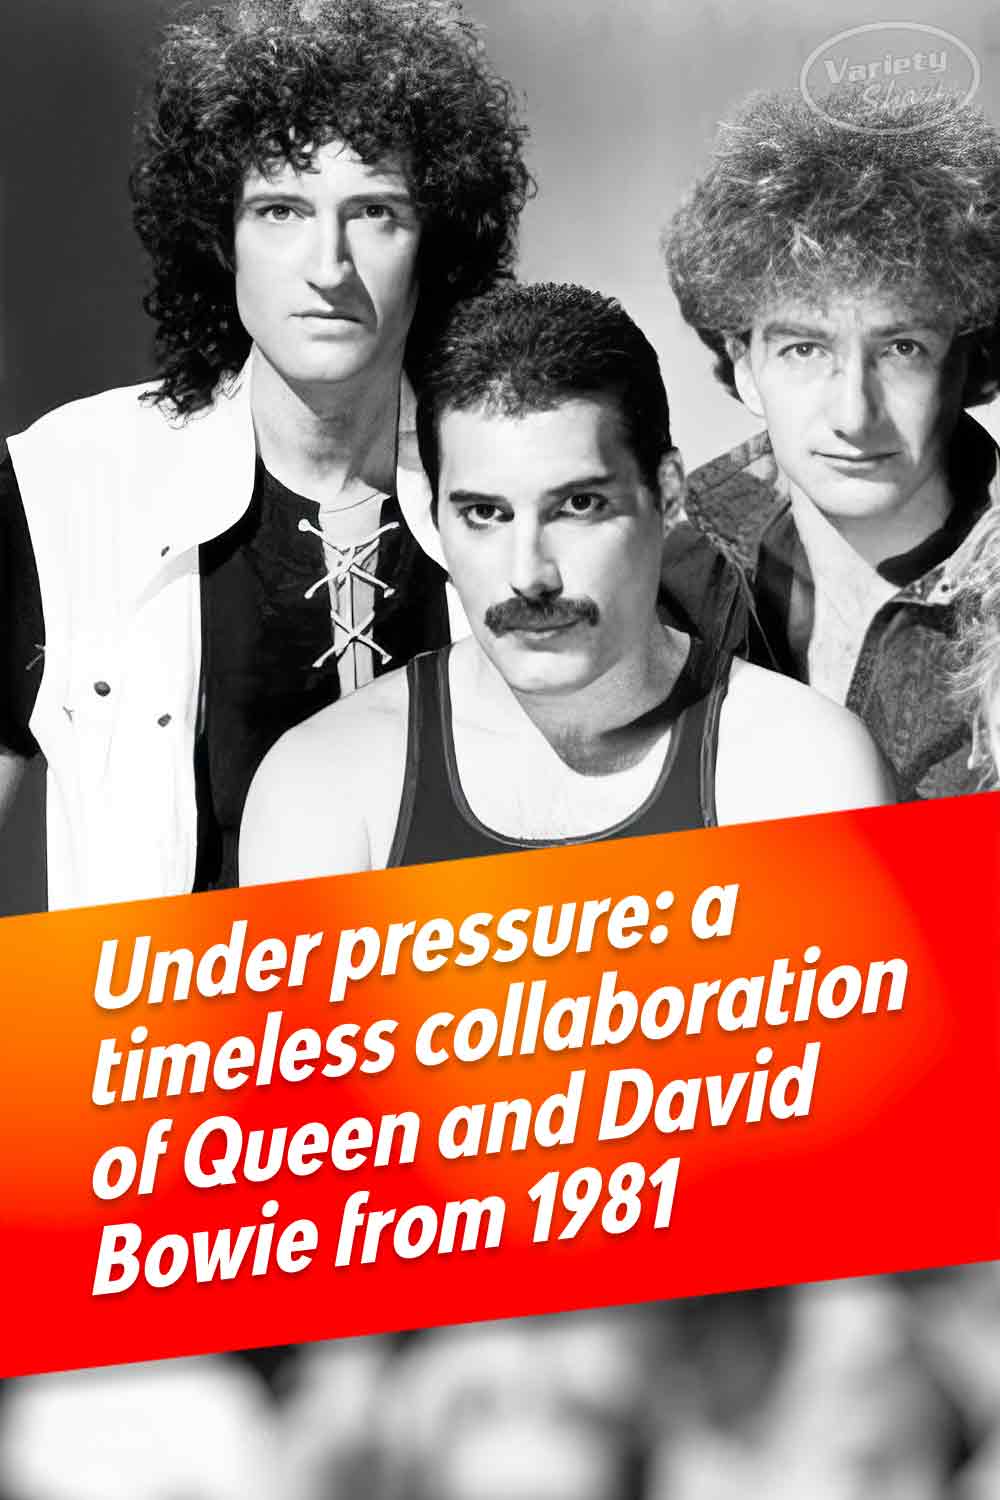 Under pressure: a timeless collaboration of Queen and David Bowie from 1981